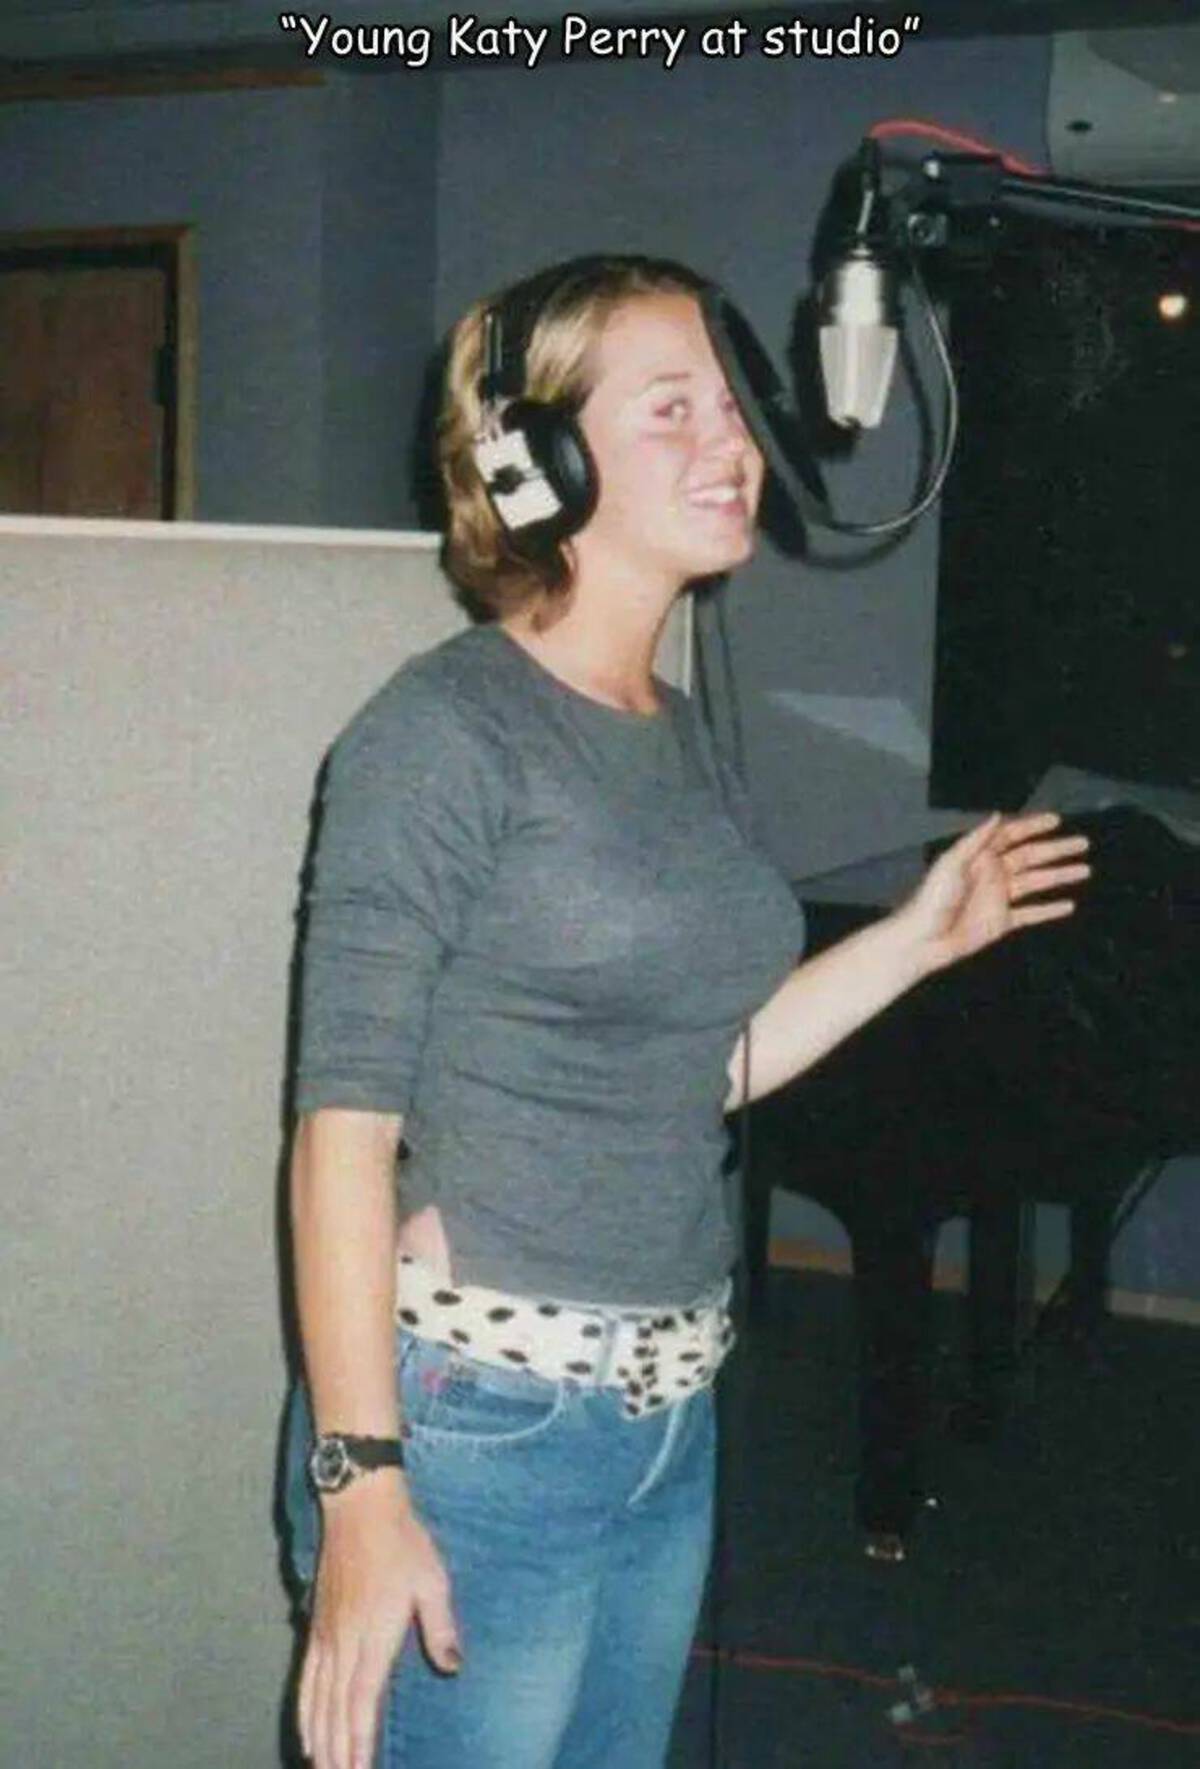 "Young Katy Perry at studio"